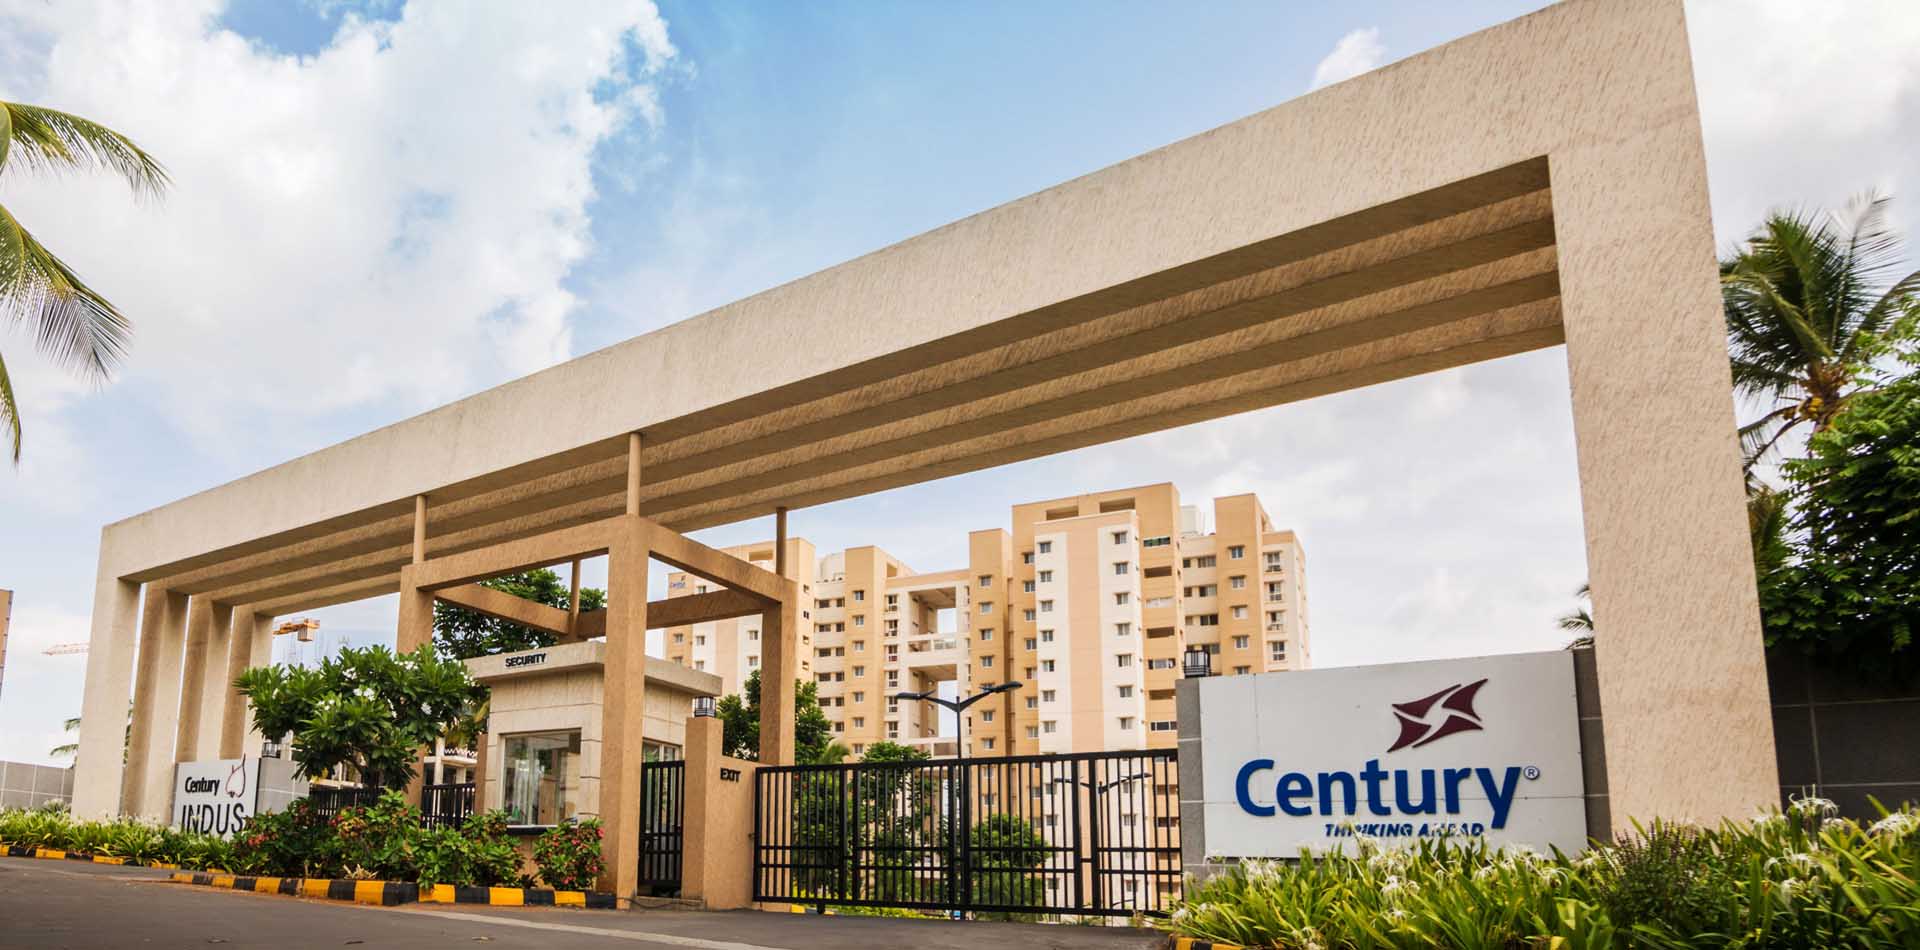 Century Indus Phase 2 is the only apartments for sale in Rajarajeshwari Nagar with 80% open space Update